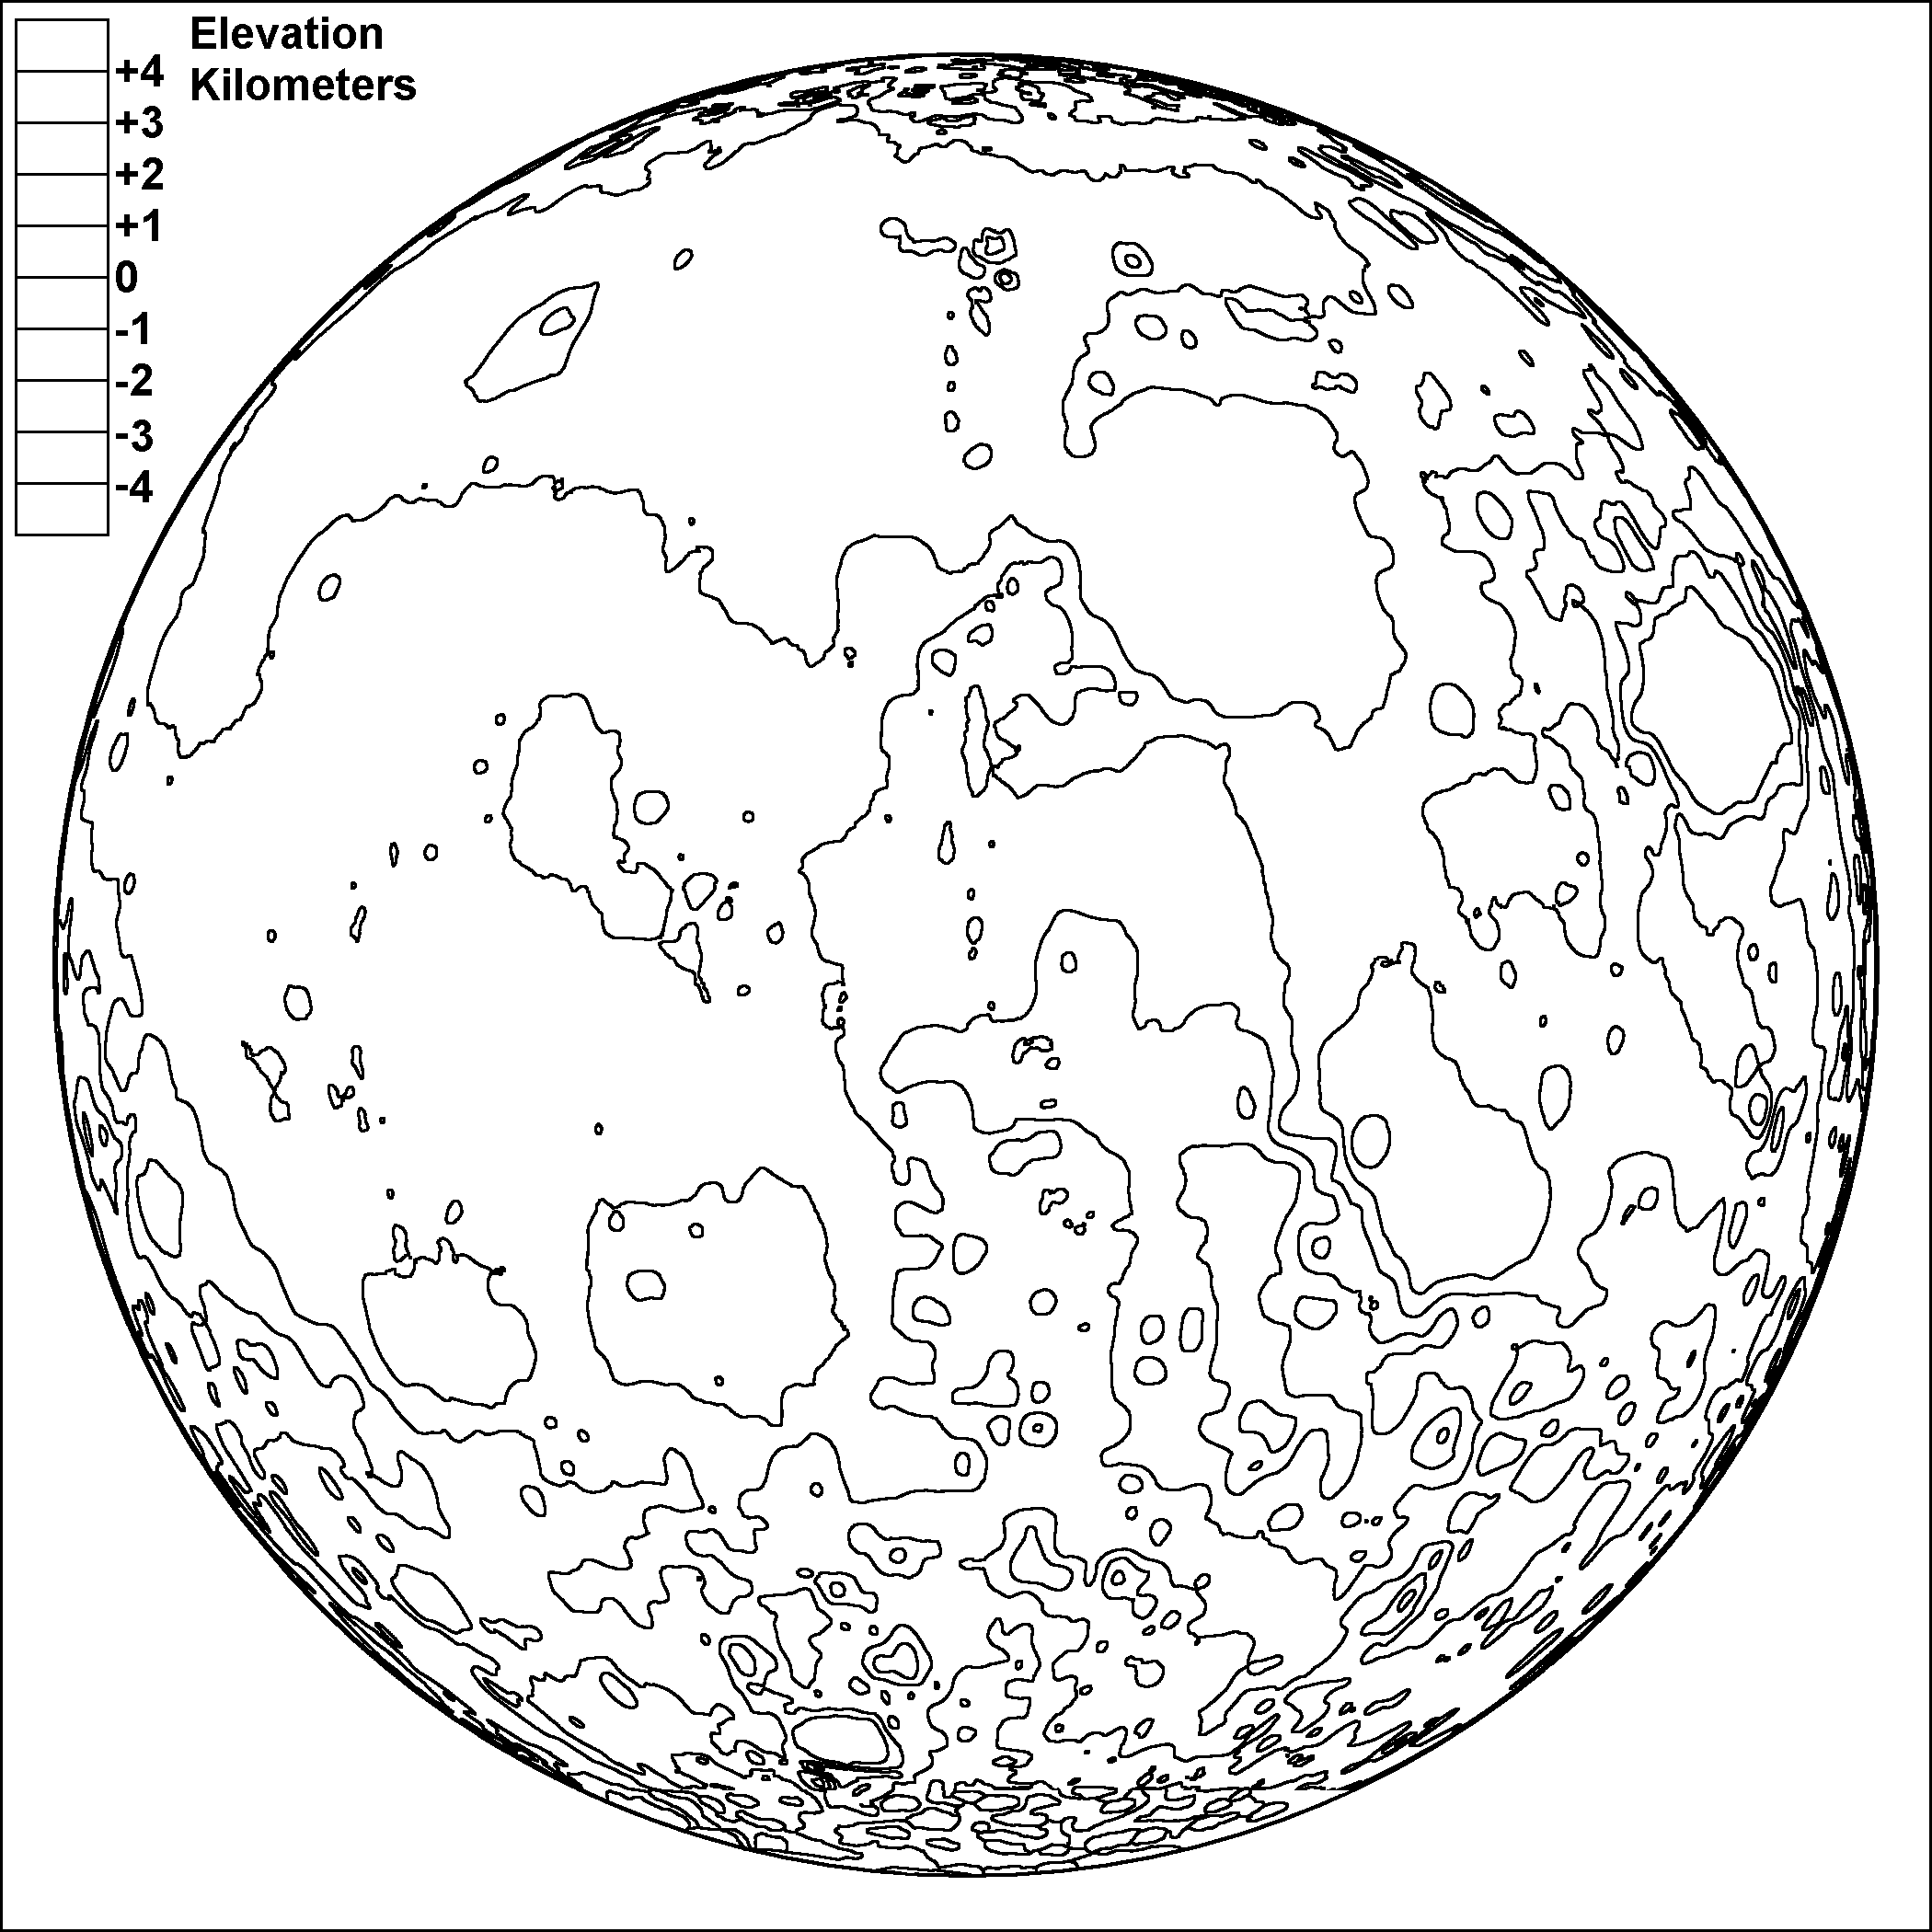 Moon Coloring Page - Coloring Pages for Kids and for Adults